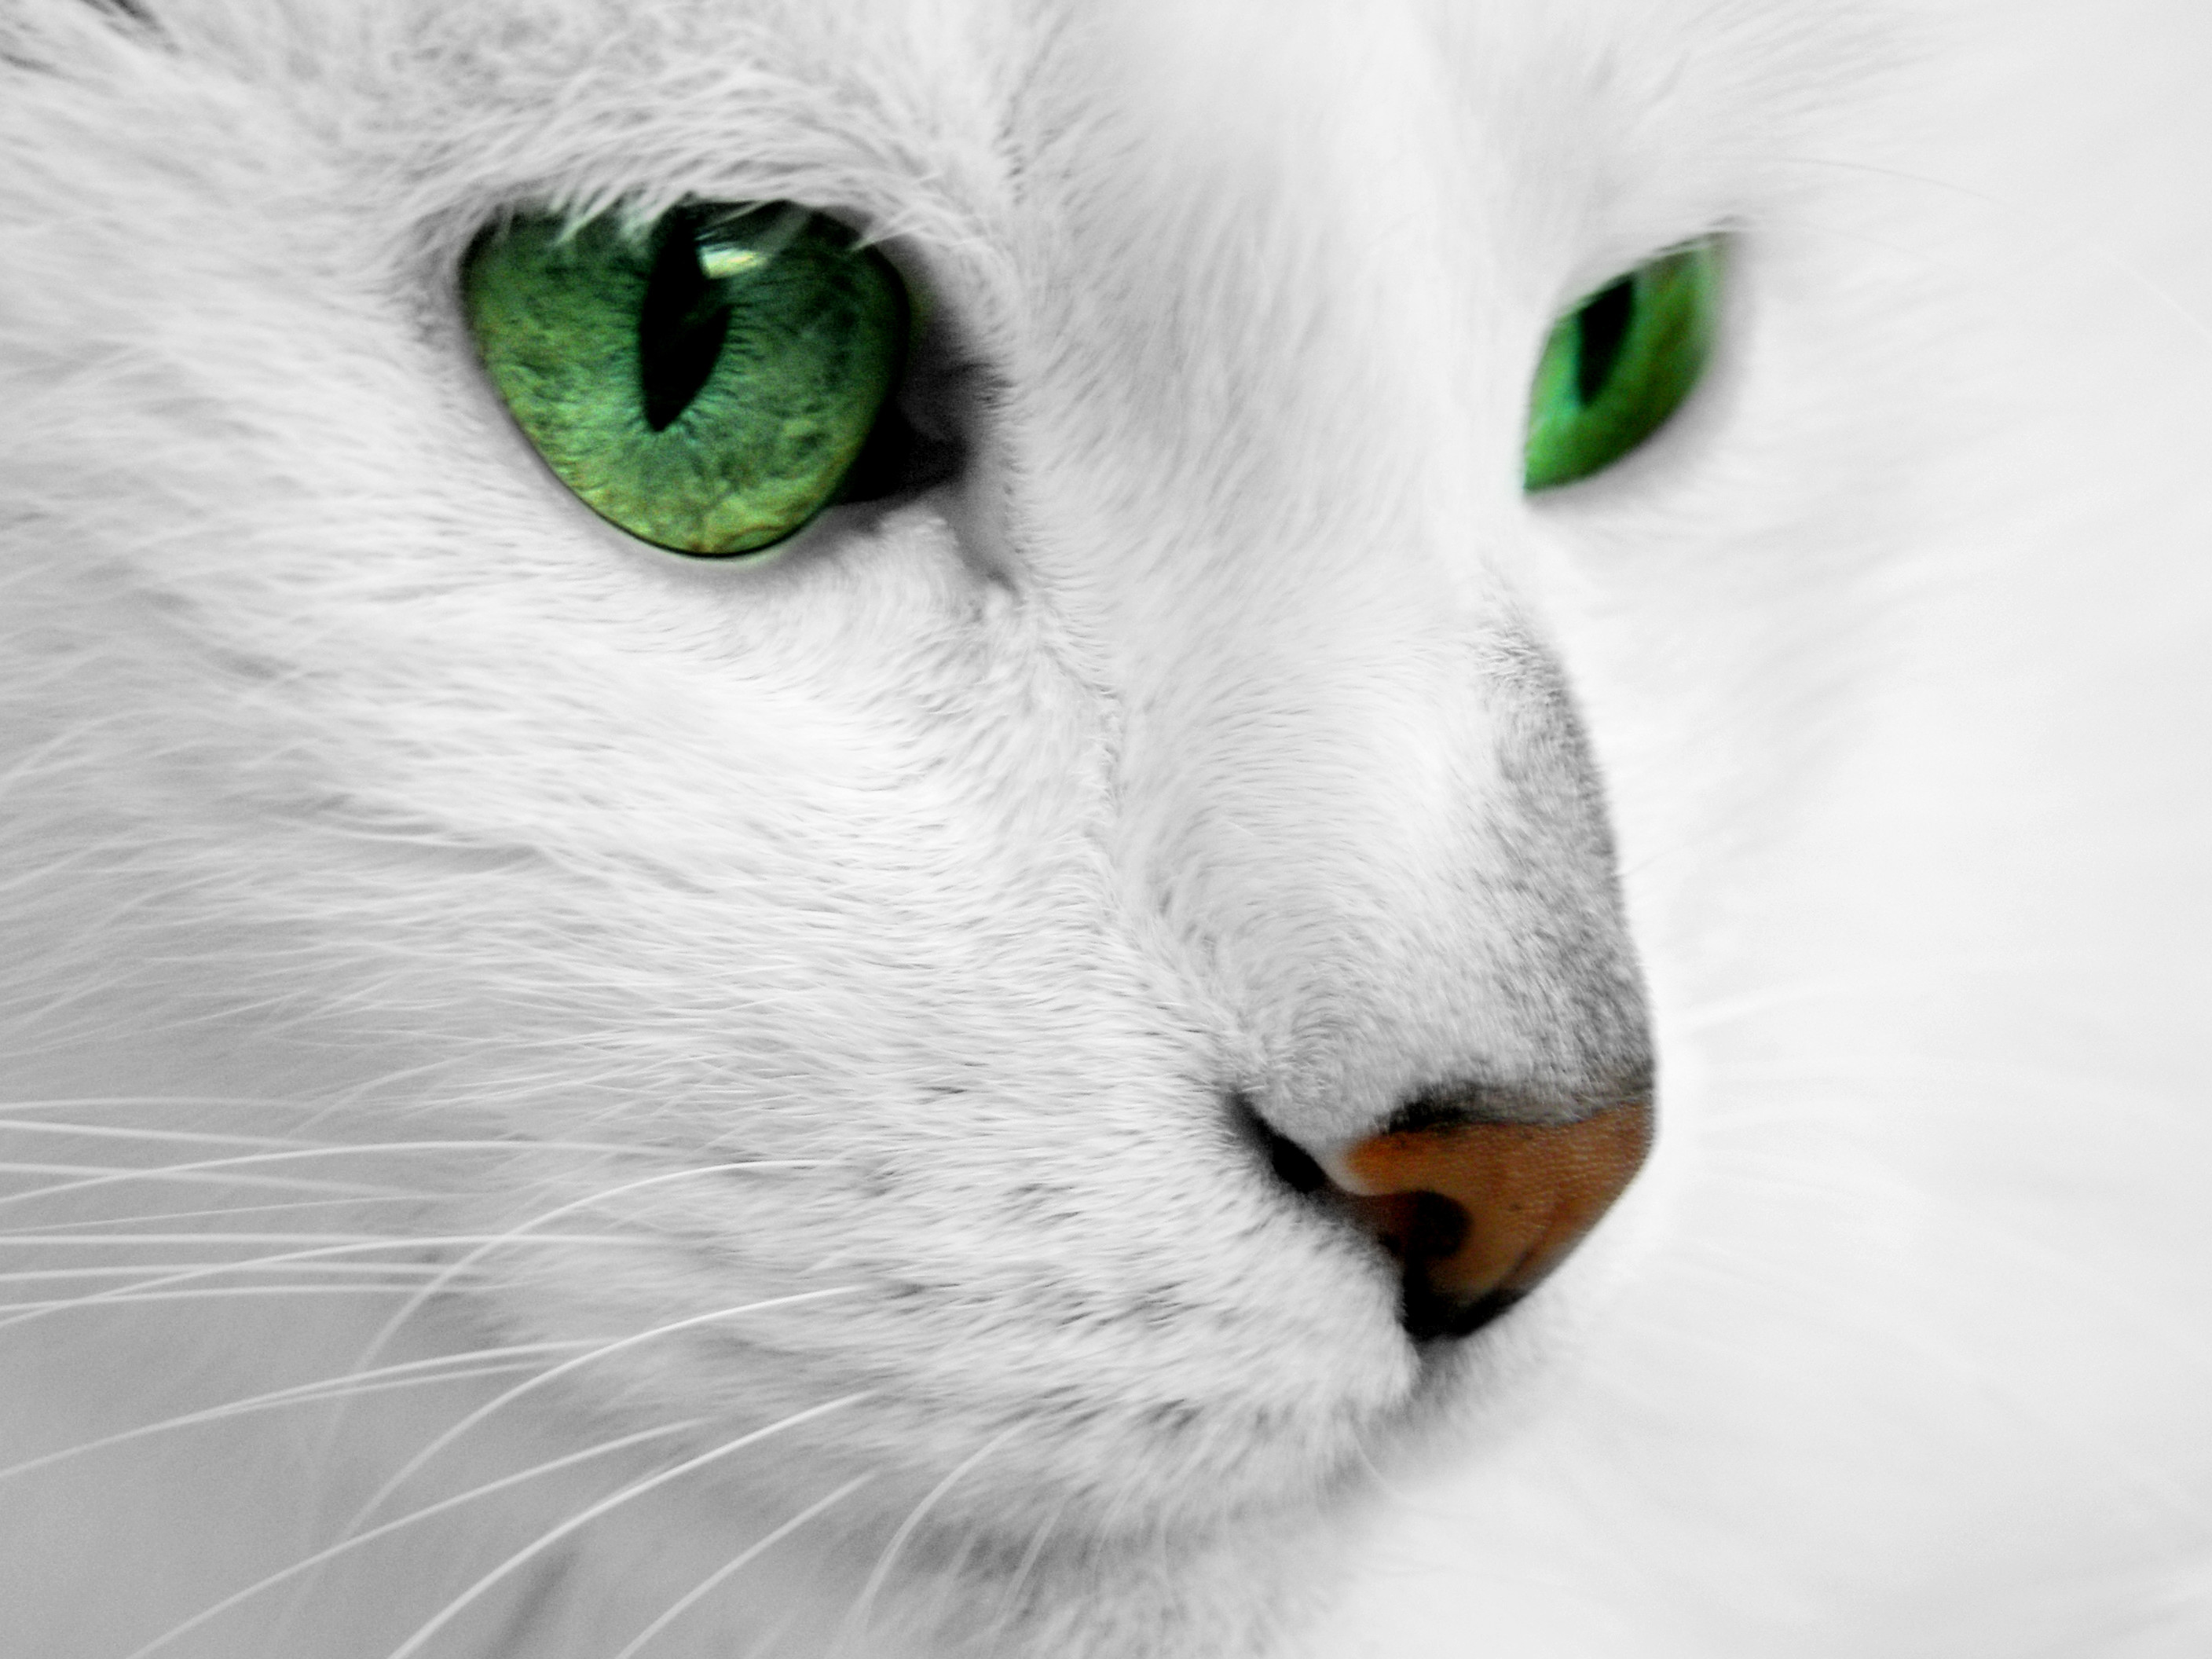 2816x2112 Love a cat with fiercely green eyes. White cat with green eyes by ReconReno.